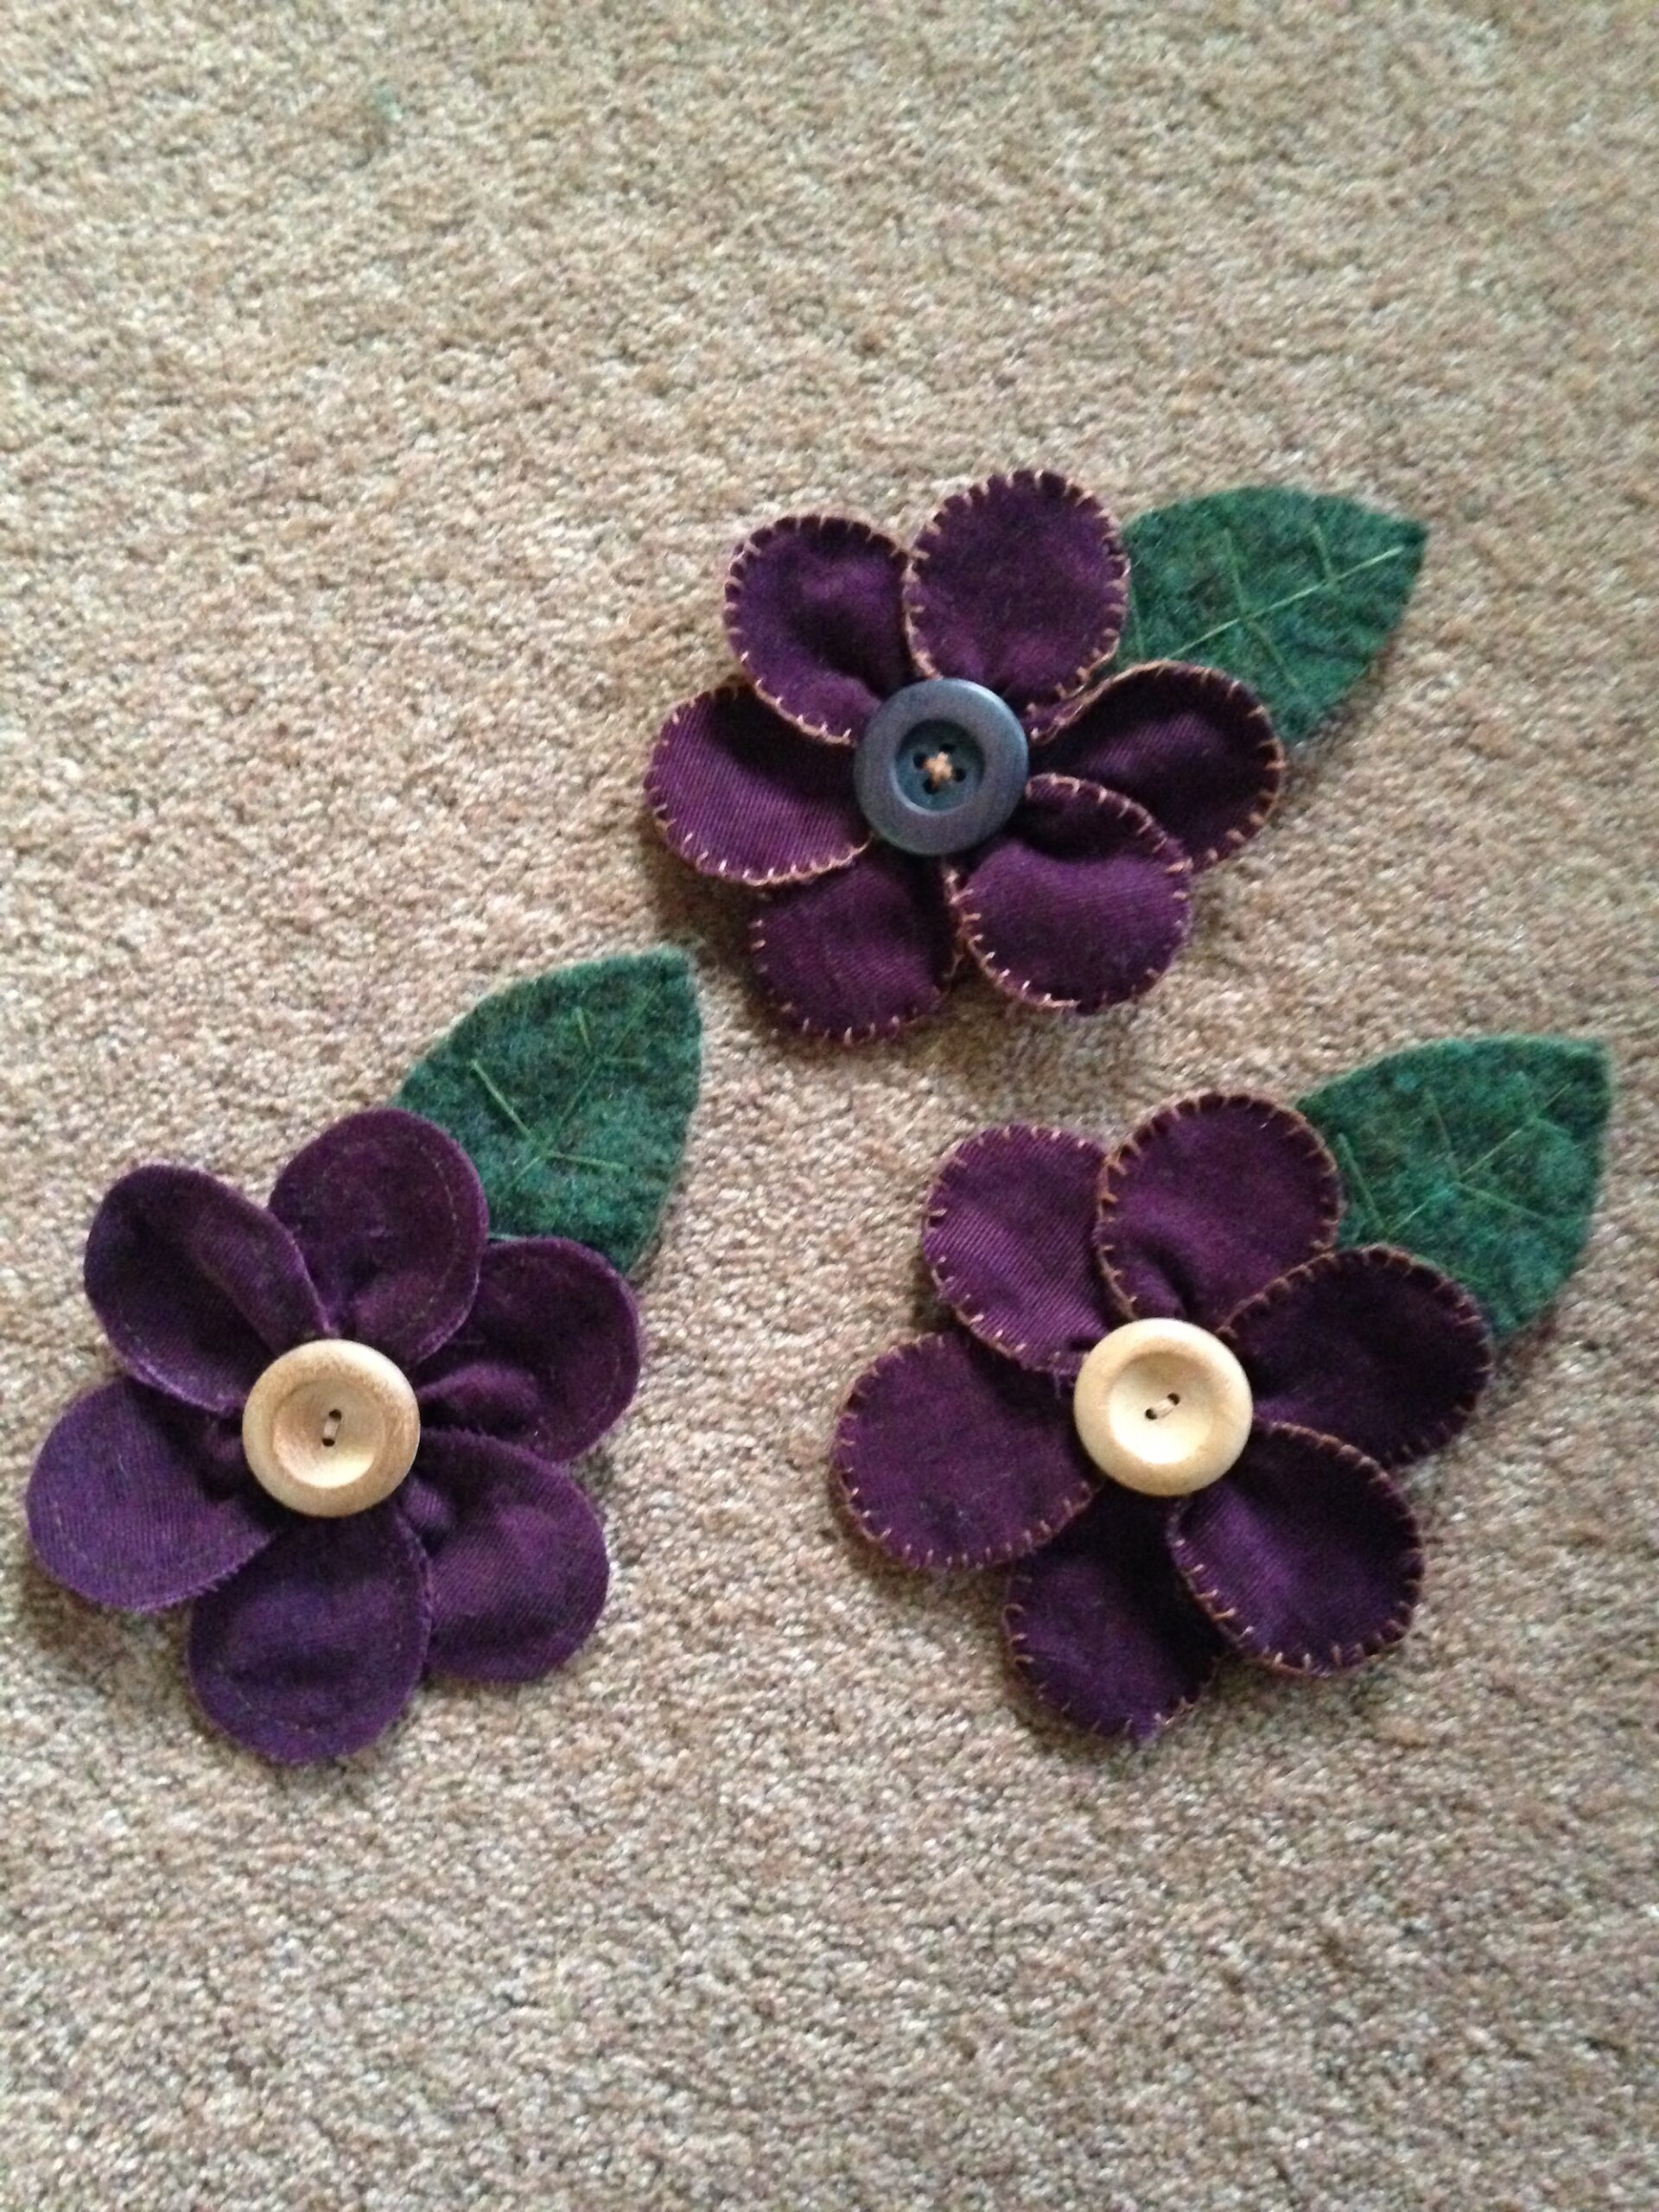 Memory flower brooches.